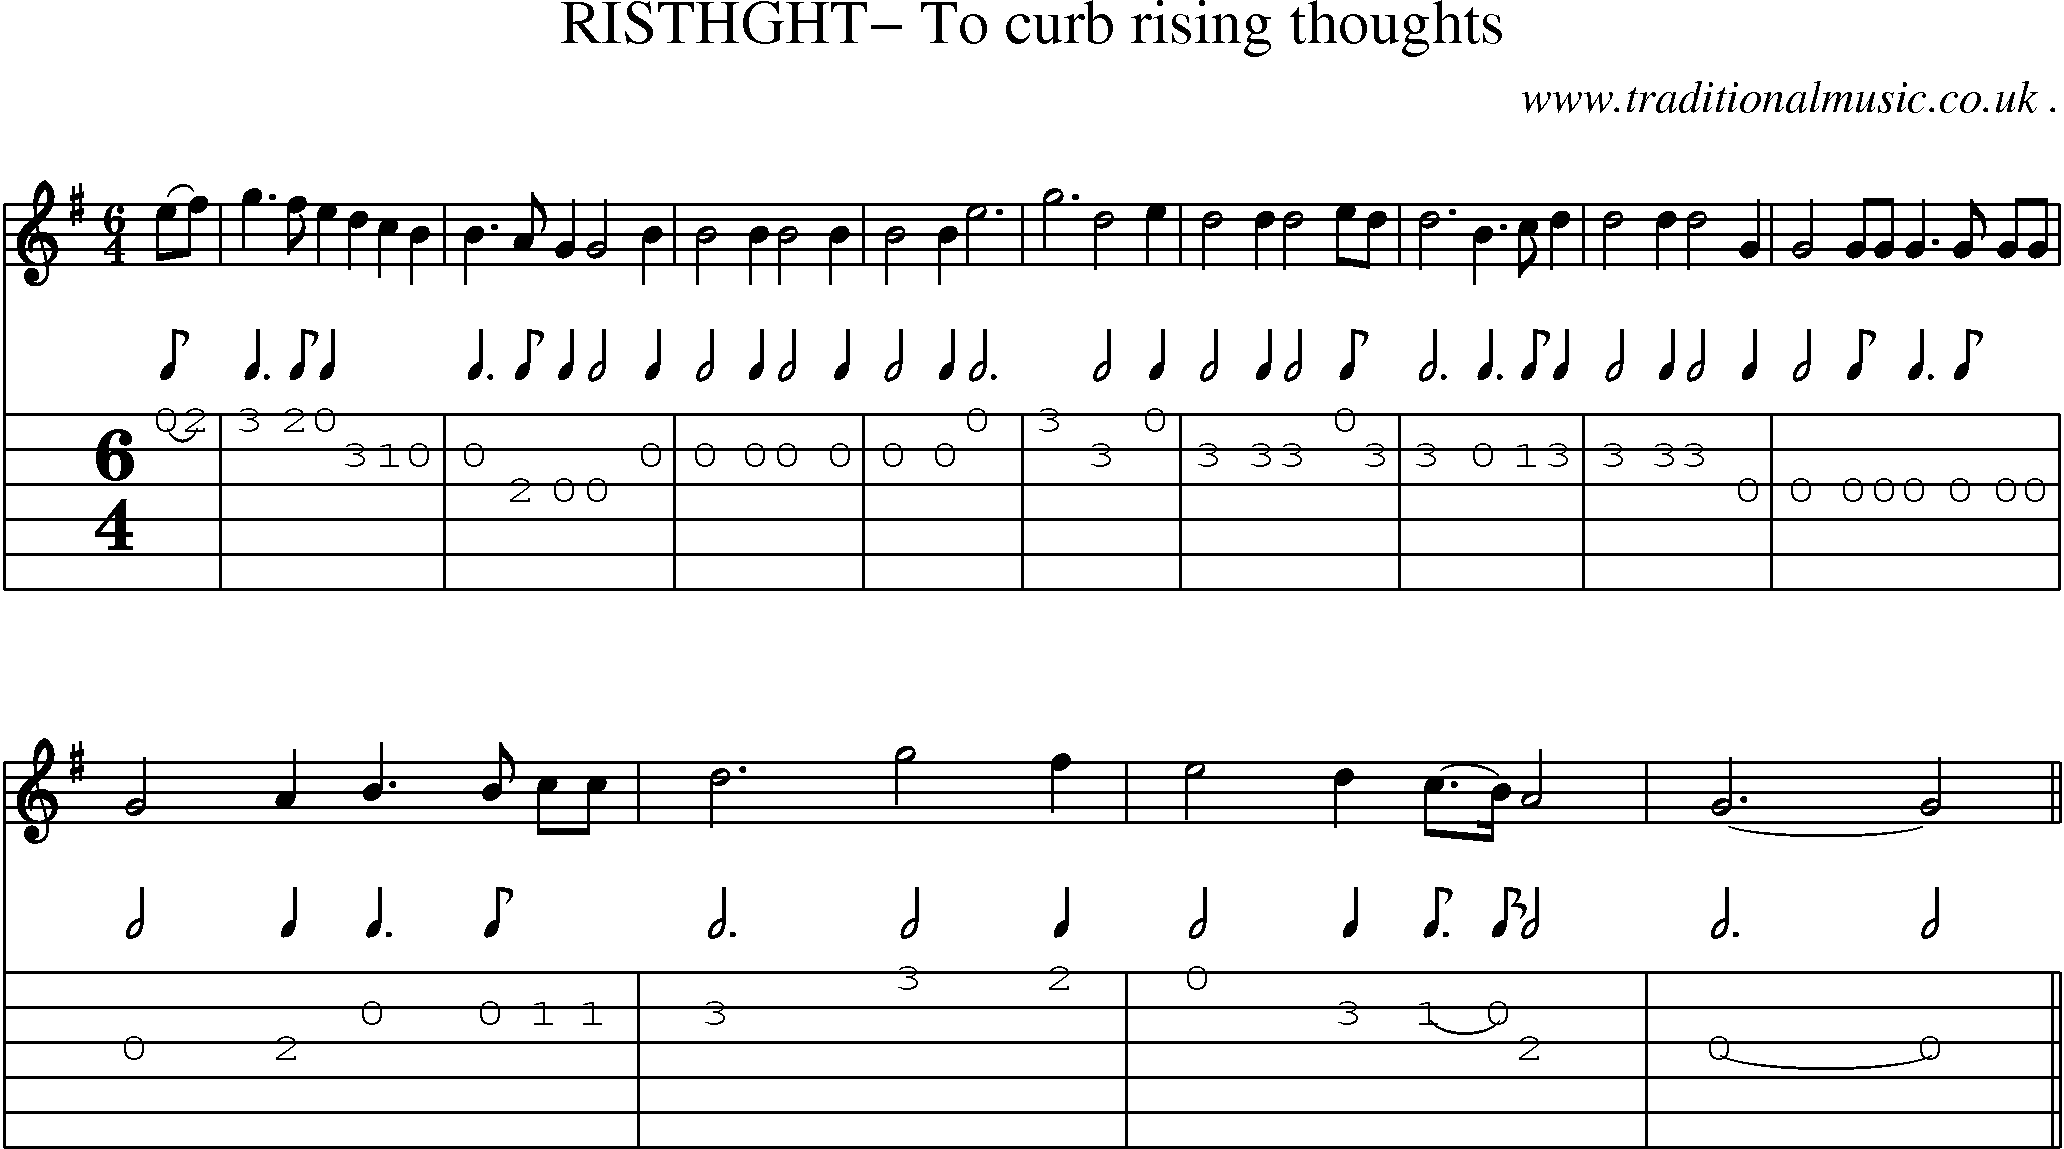 Sheet-Music and Guitar Tabs for Risthght To Curb Rising Thoughts